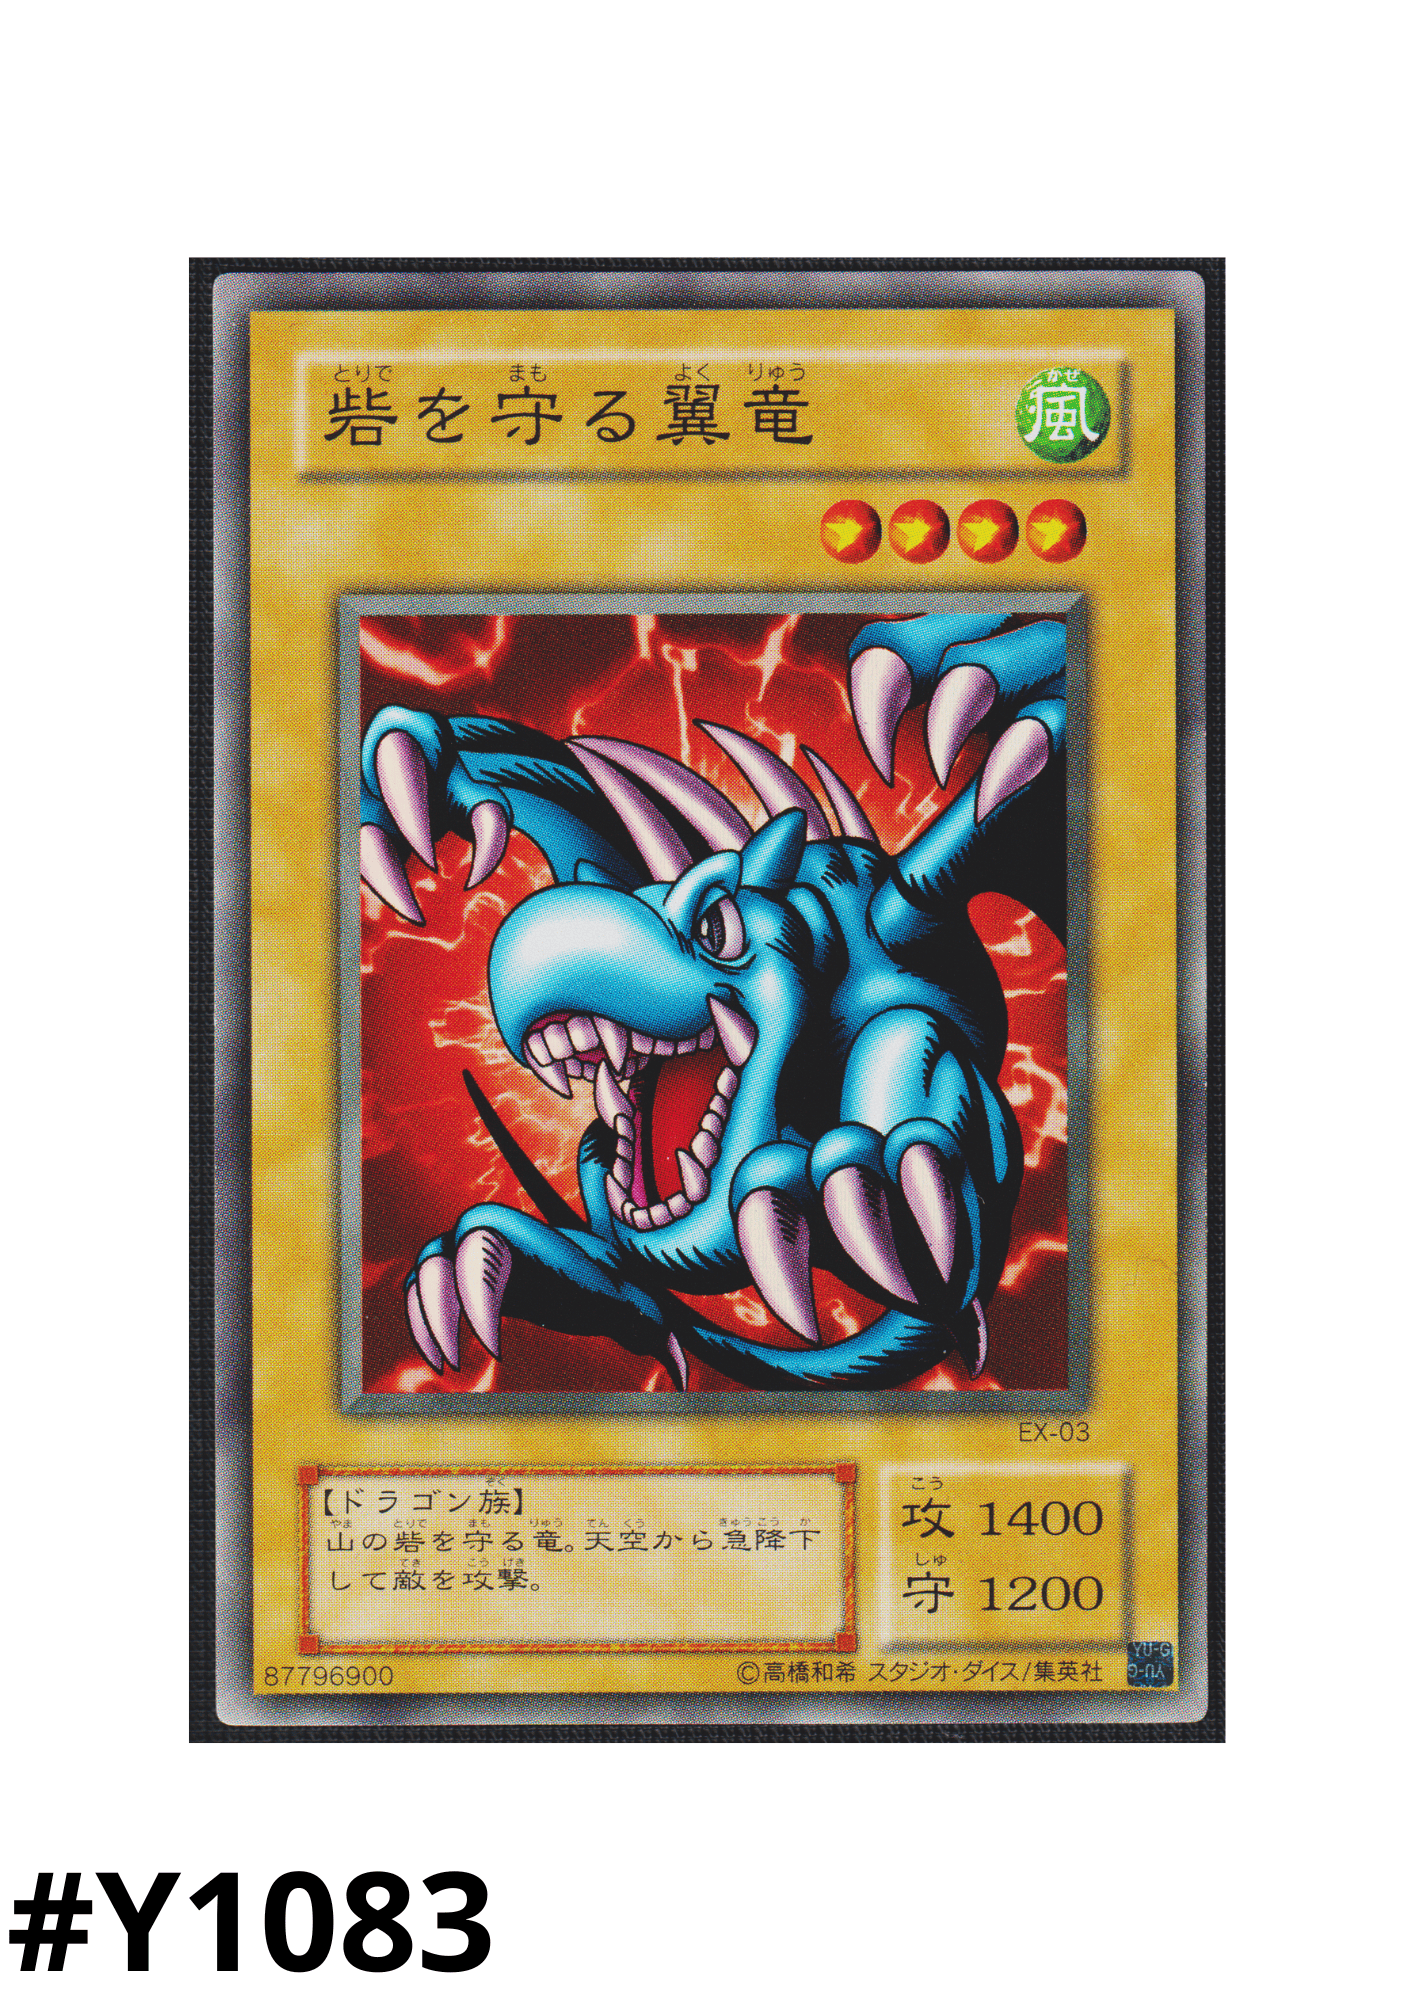 Winged Dragon, Guardian of the Fortress #1 EX-03| EX-R Starter Box